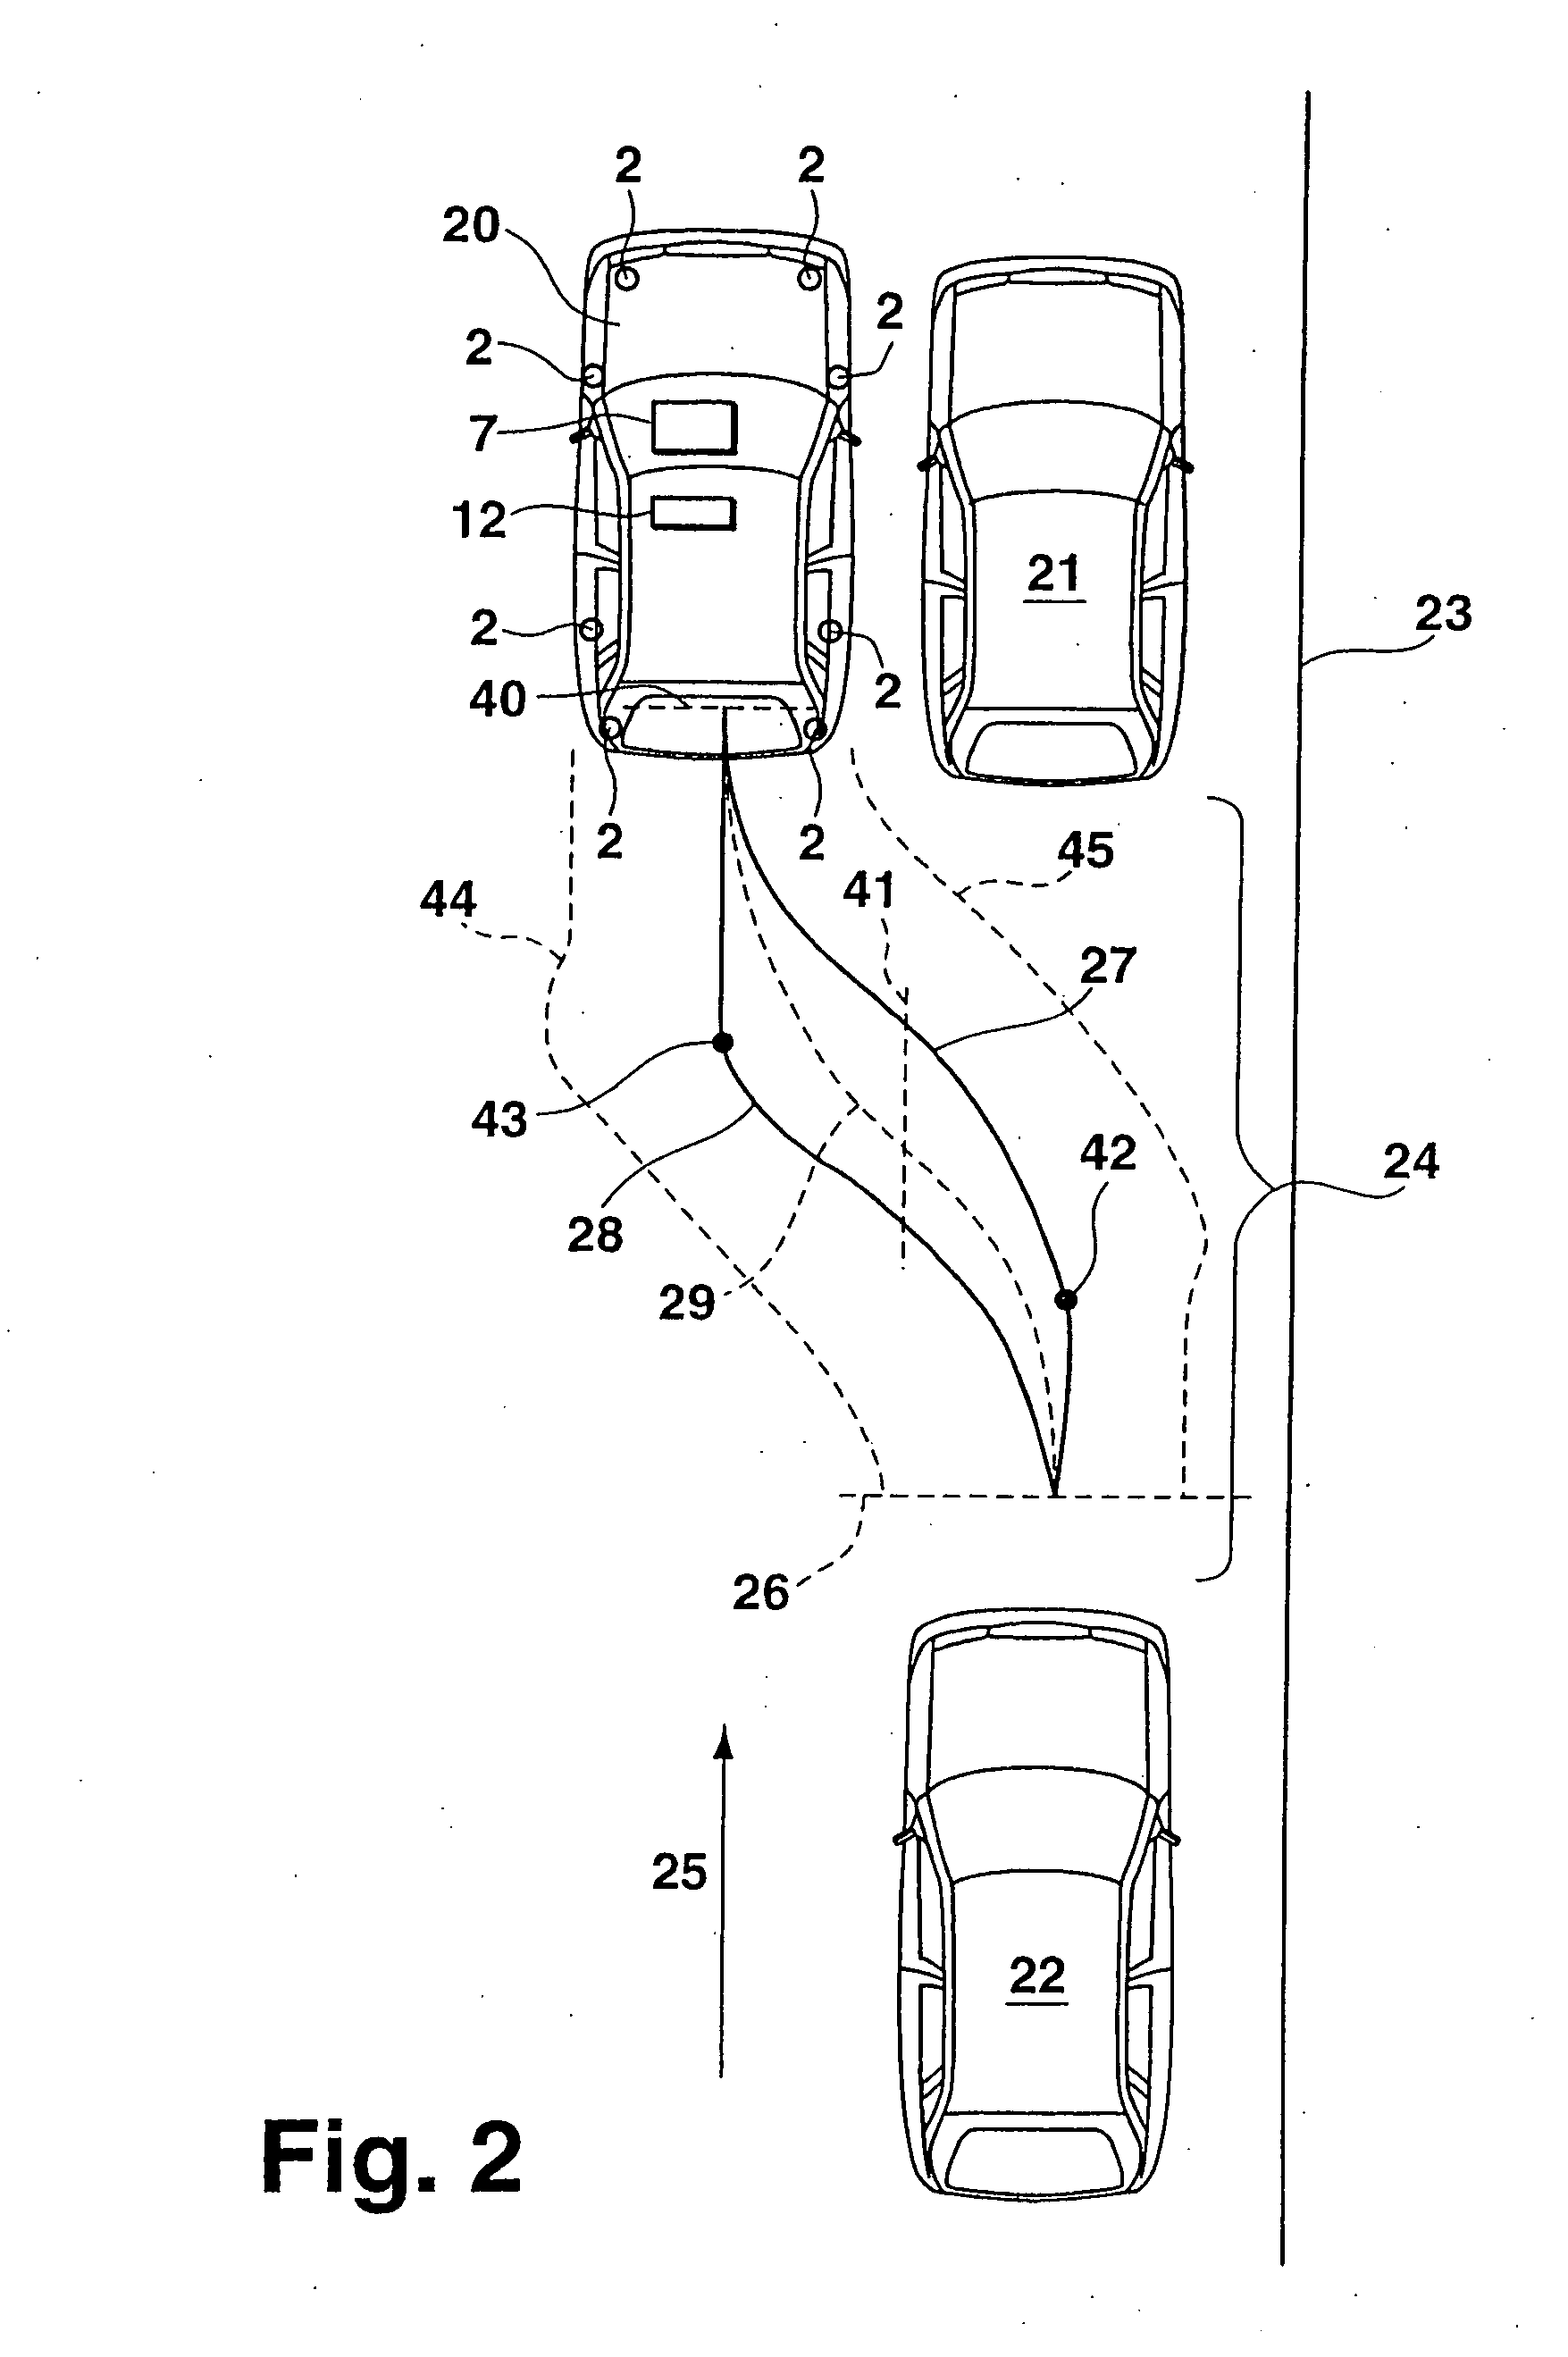 Driver-assist device, in particular, for parking a vehicle